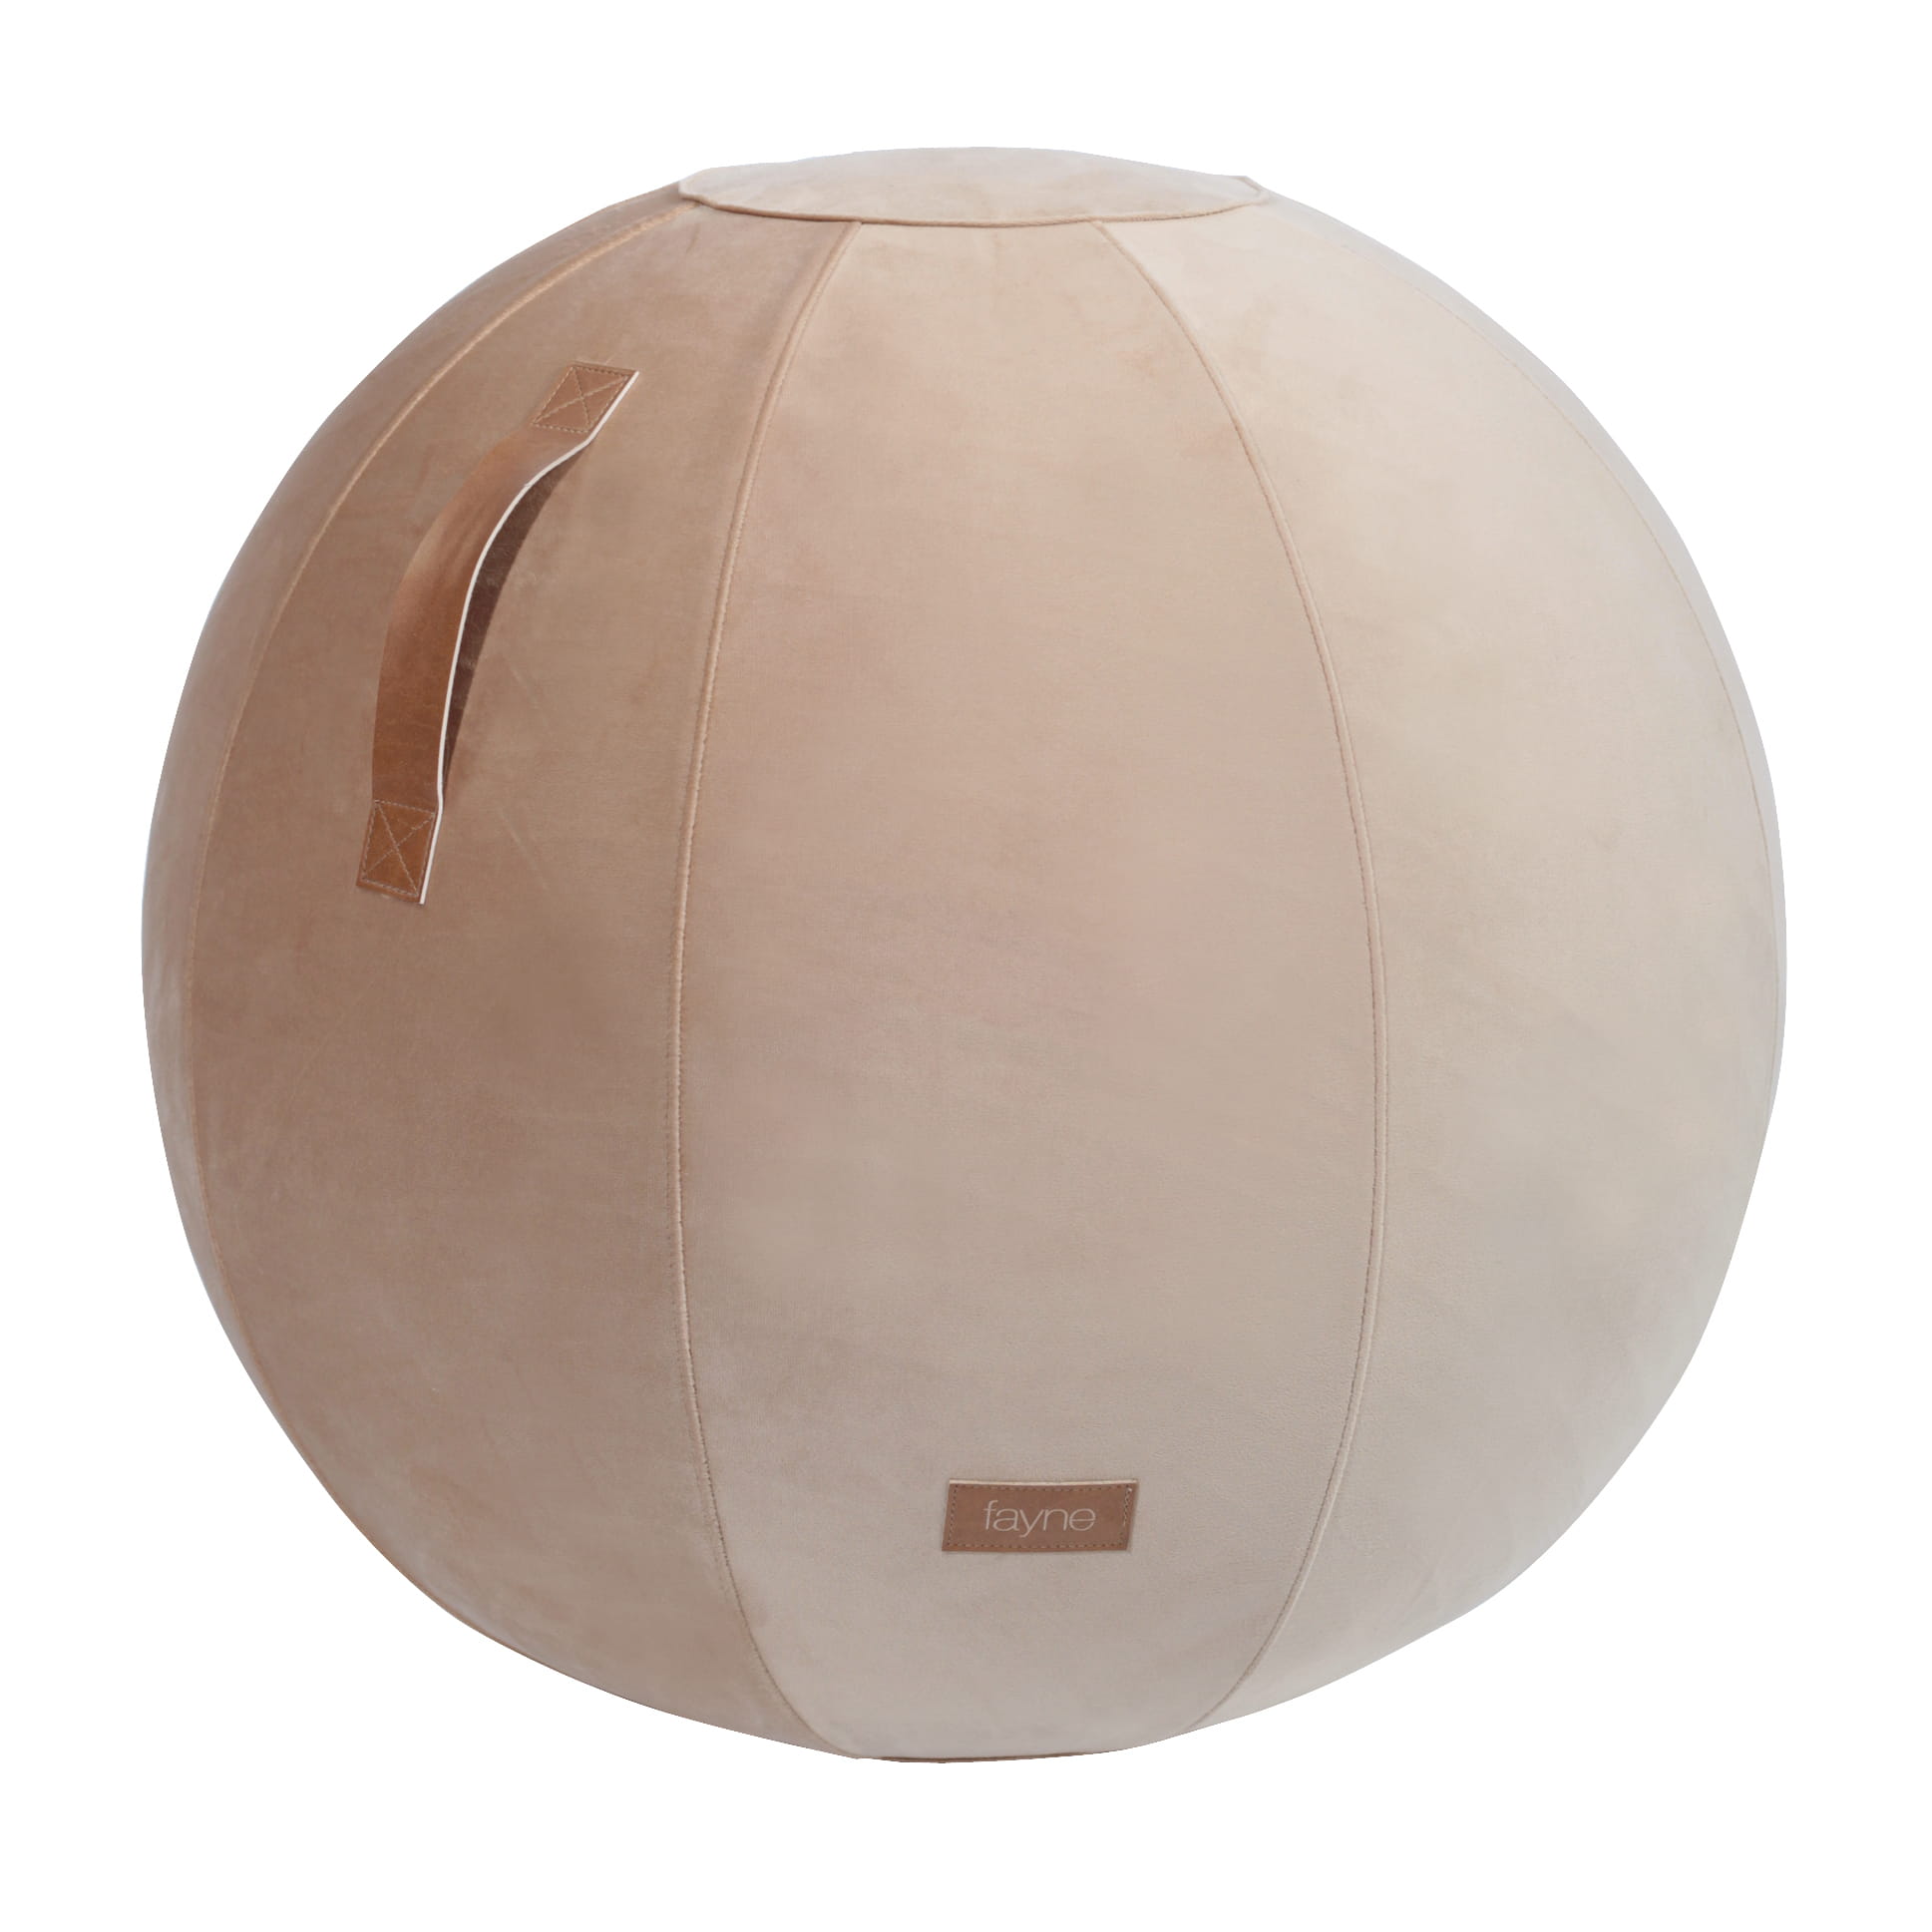 Fayne, sitting ball with leather handle, beige 